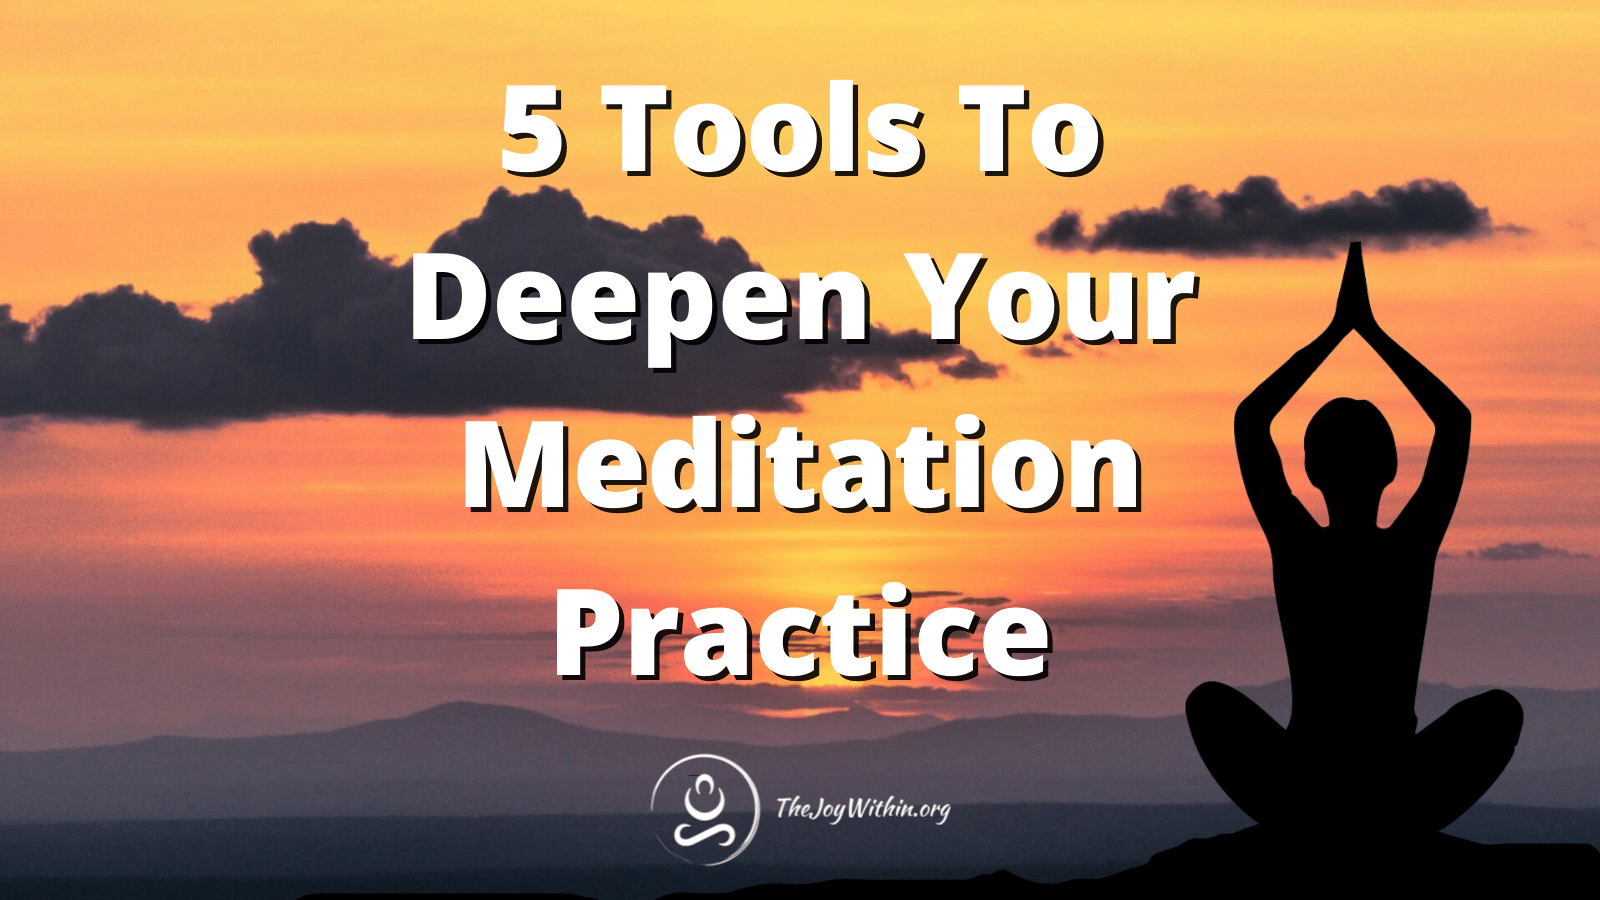 Read more about the article 5 Tools To Deepen Your Meditation Practice